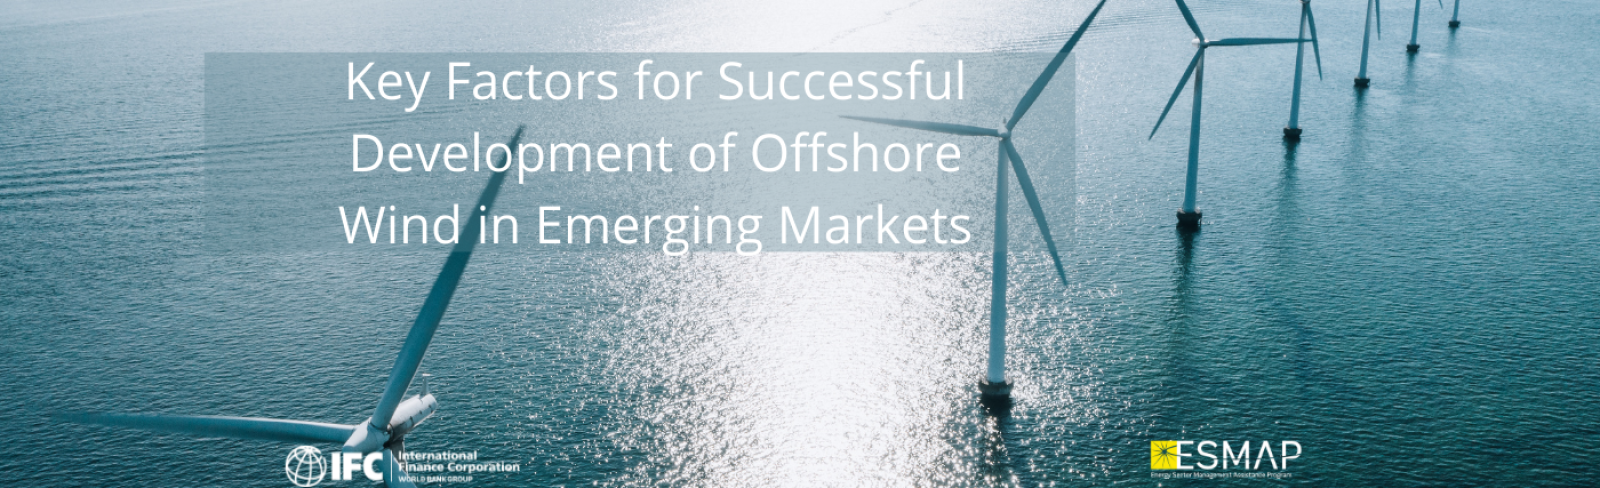 New ESMAP Report Highlights Key Factors for Successful Development of Offshore Wind in Emerging Markets